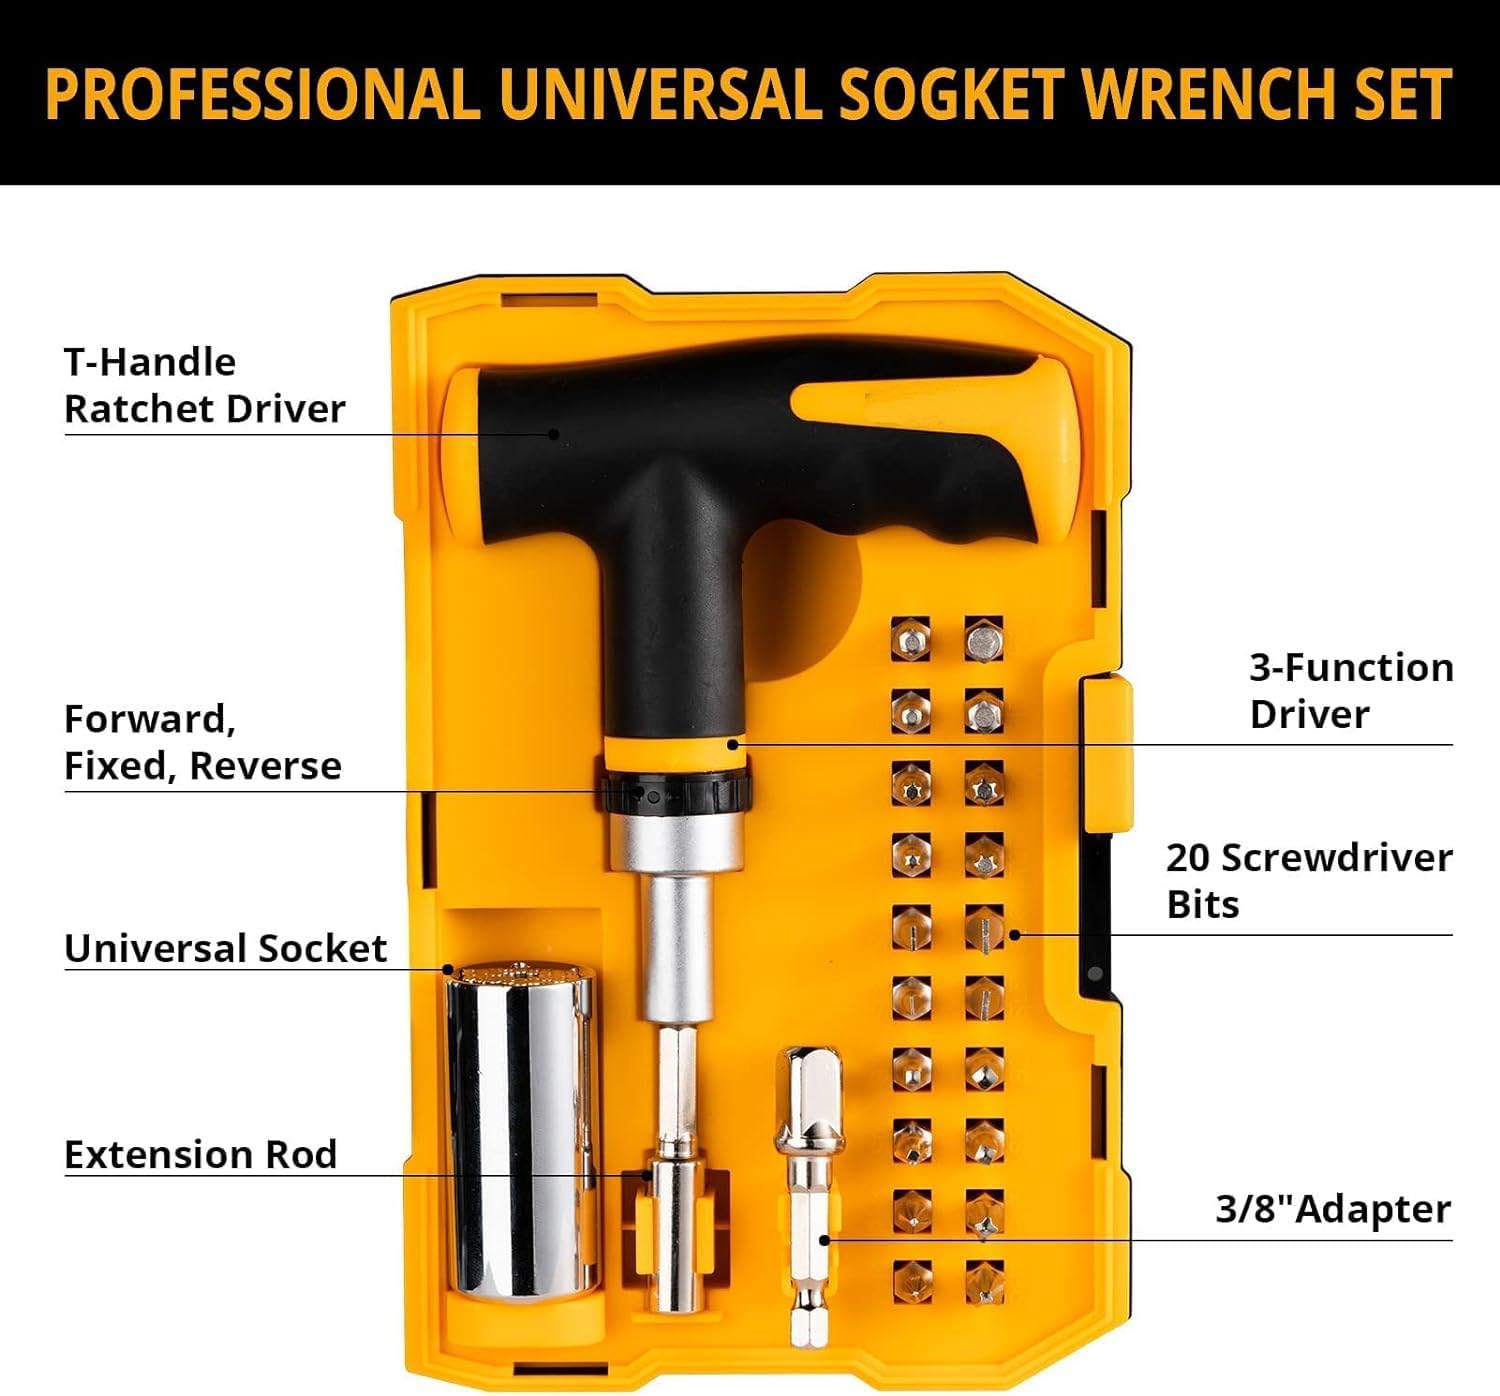 Gifts for Men Universal Socket Wrench Sets - Set of 25 with 1/4-to-3/4-Inch Multi-Function Ratchet Wrench Power Drill Adapter - Super Socket Tool Square Drive Sockets